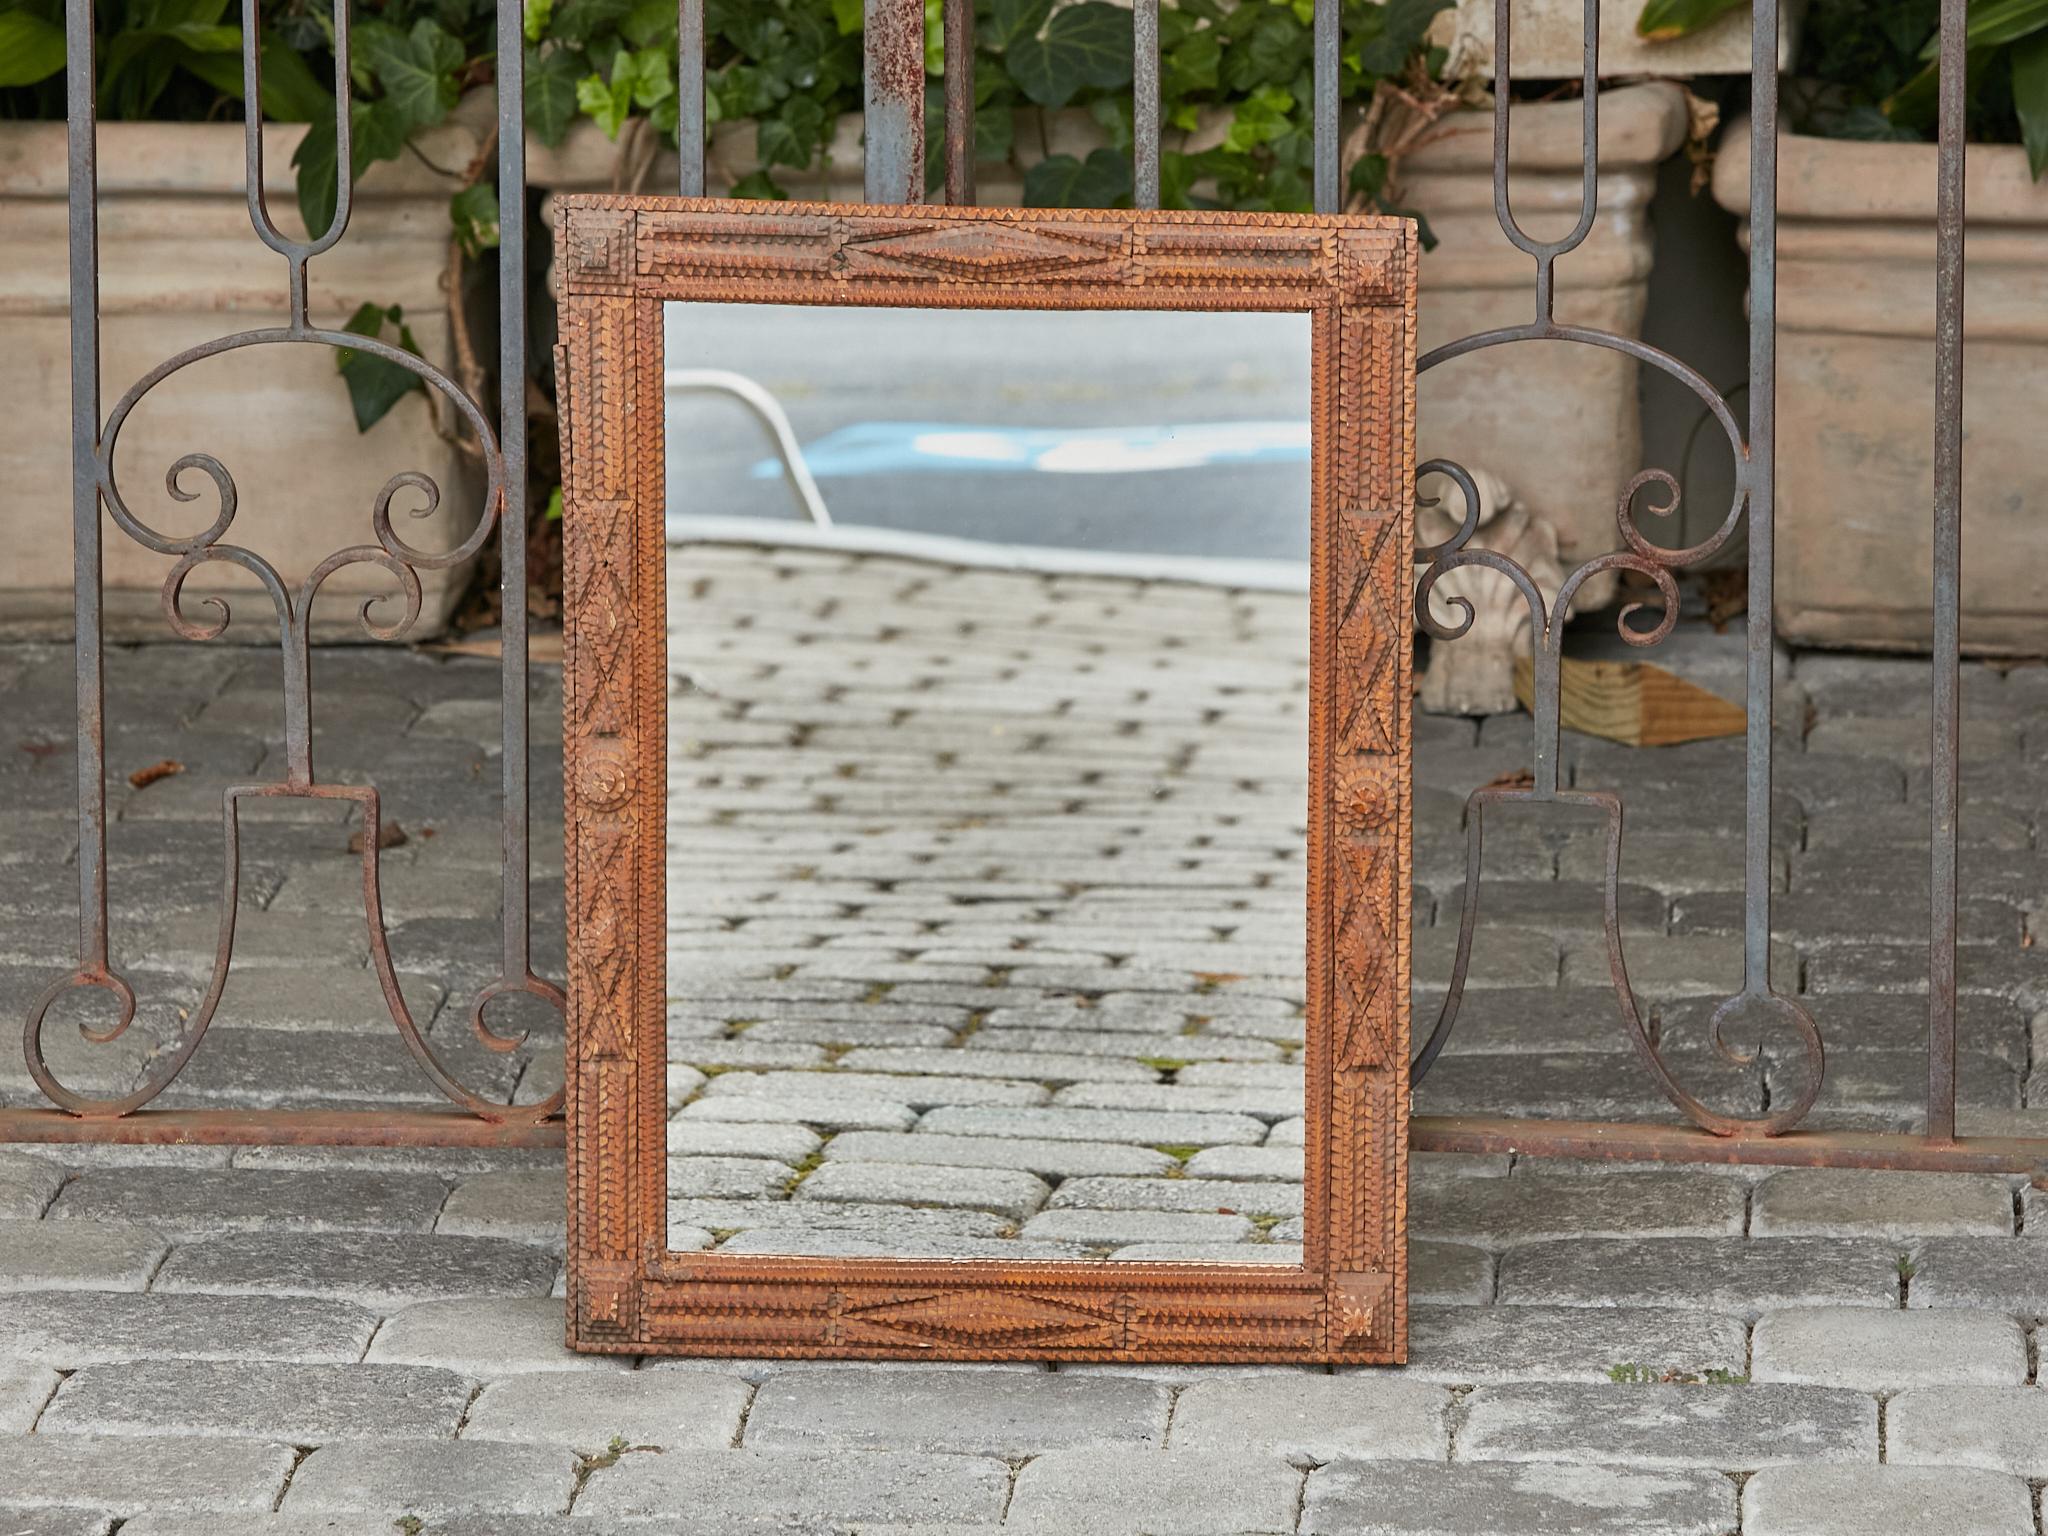 A French Tramp Art hand-carved wooden mirror from the Turn of the Century circa 1900, with raised motifs and brown patina. Step back in time and embrace the rustic charm of this exquisite French Tramp Art hand-carved wooden mirror from the Turn of